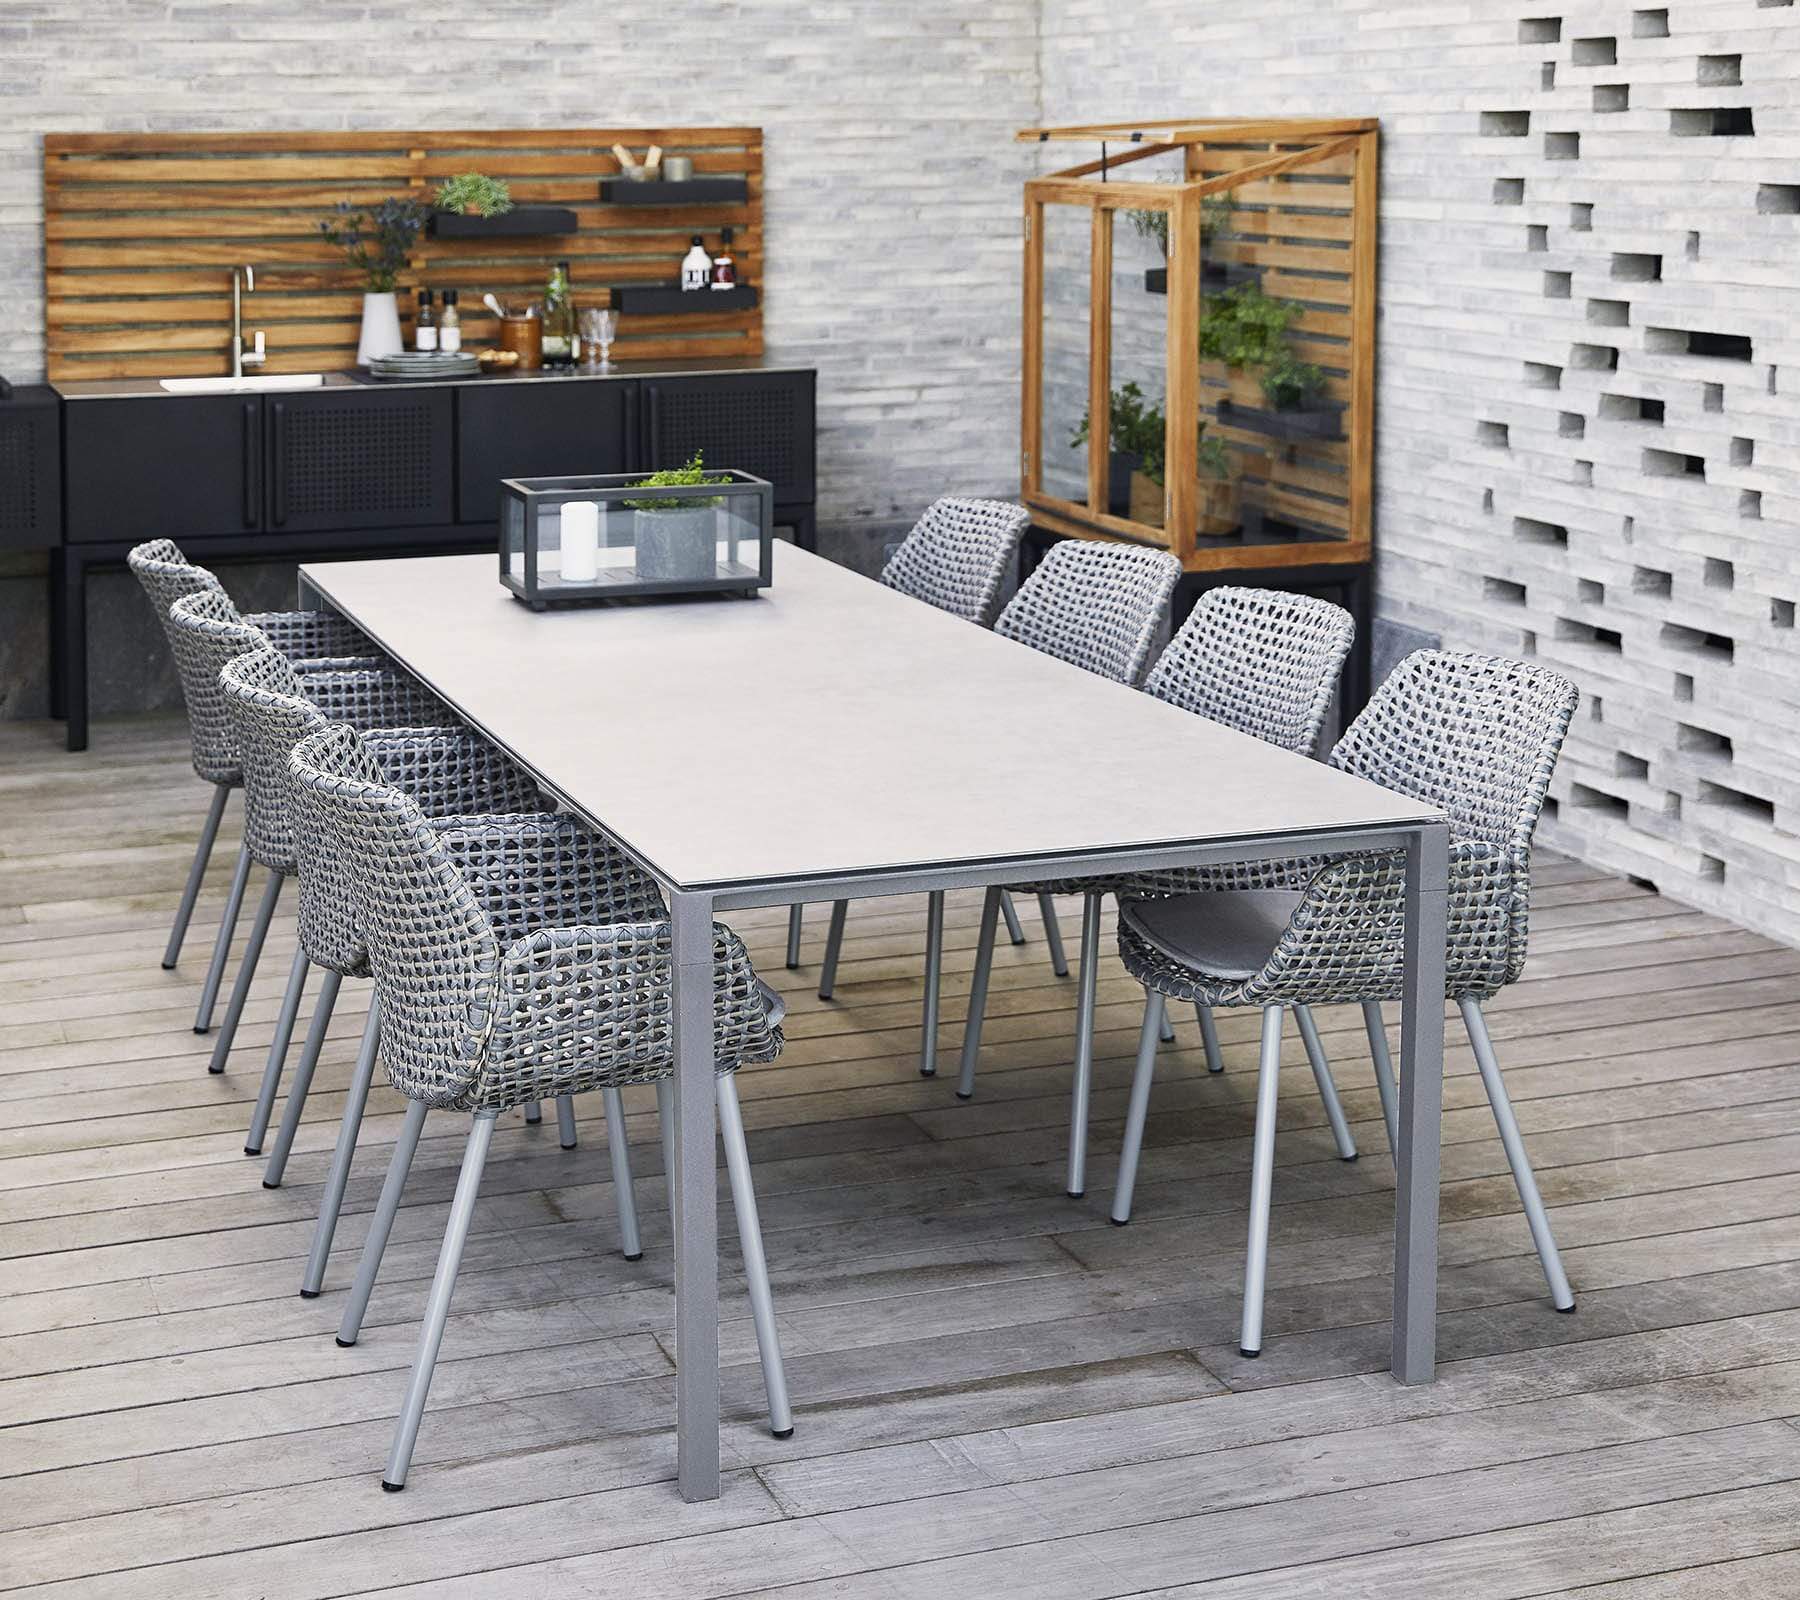 Boxhill's Vibe light grey outdoor armchair with light grey rectangular outdoor dining table placed in modern dining area